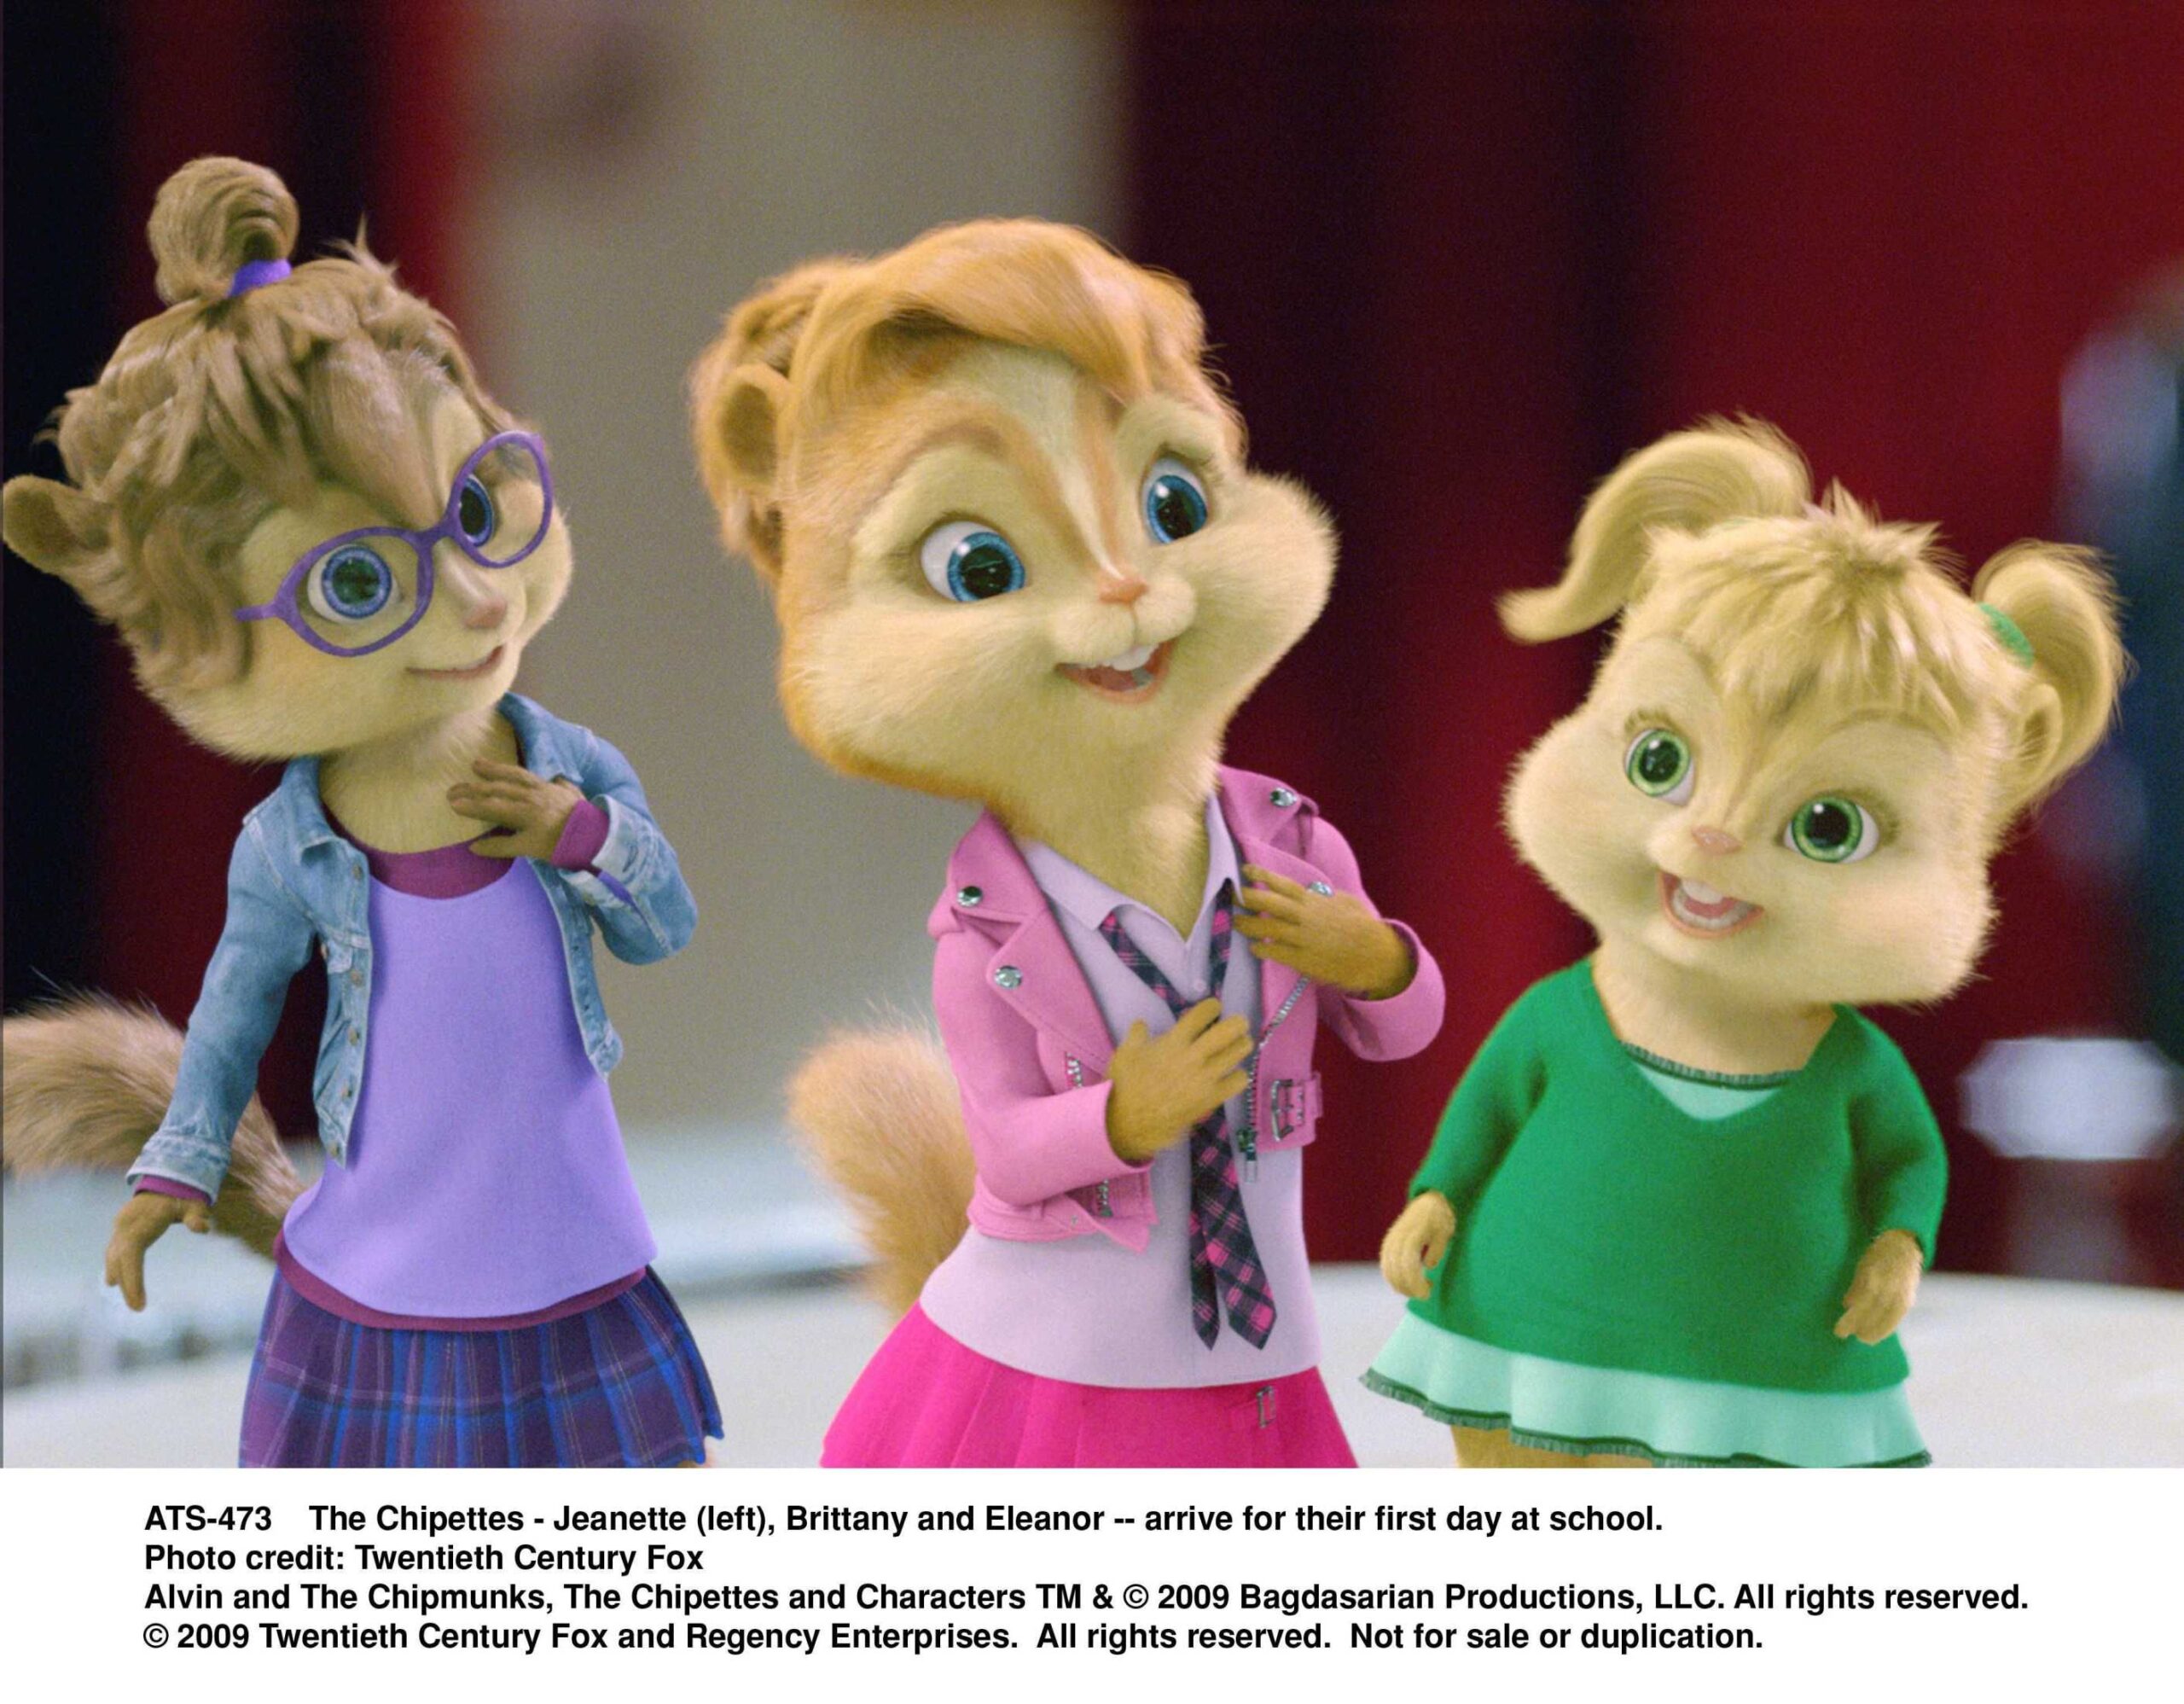 What are the three girl chipmunks names? 